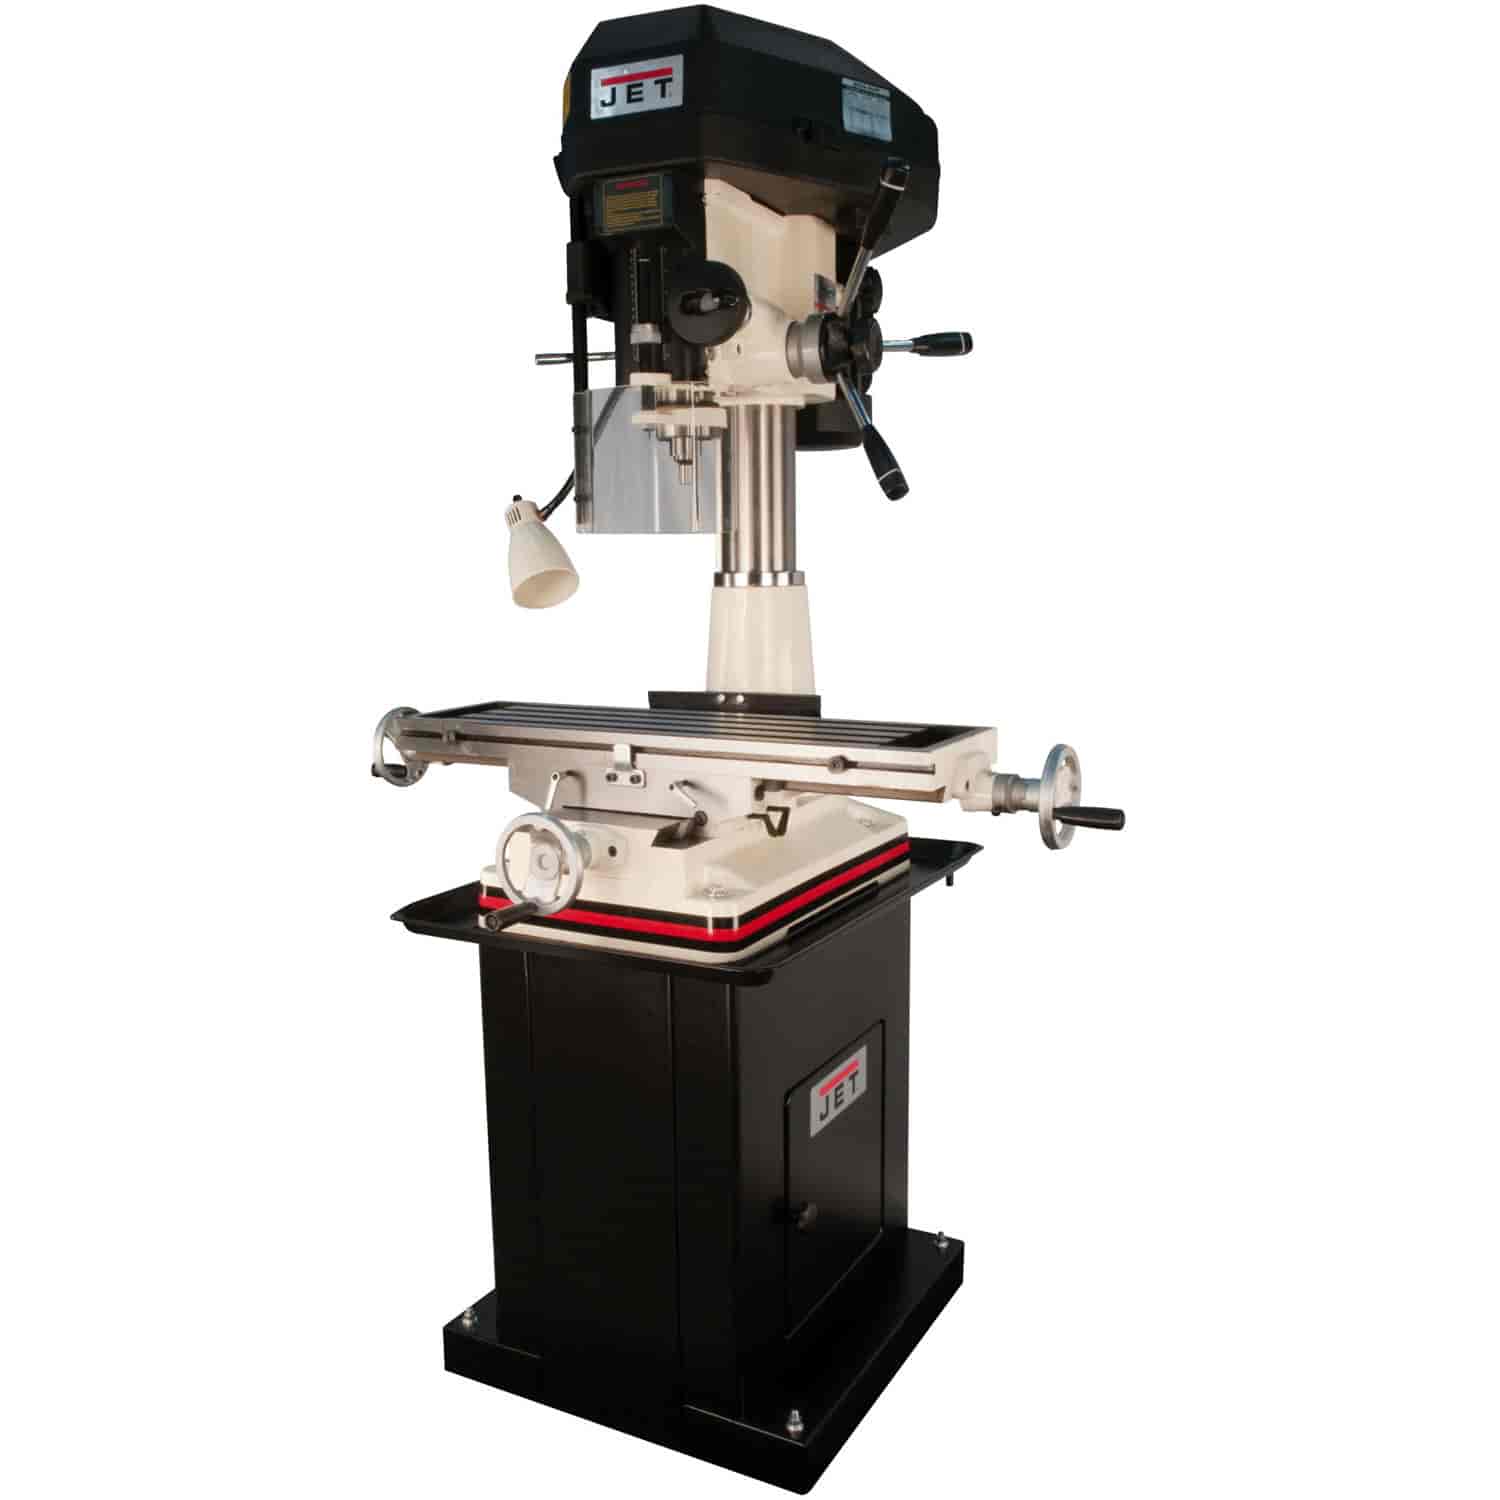 JMD-18PFN Mill/Drill With ACU-RITE VUE DRO and X-Axis